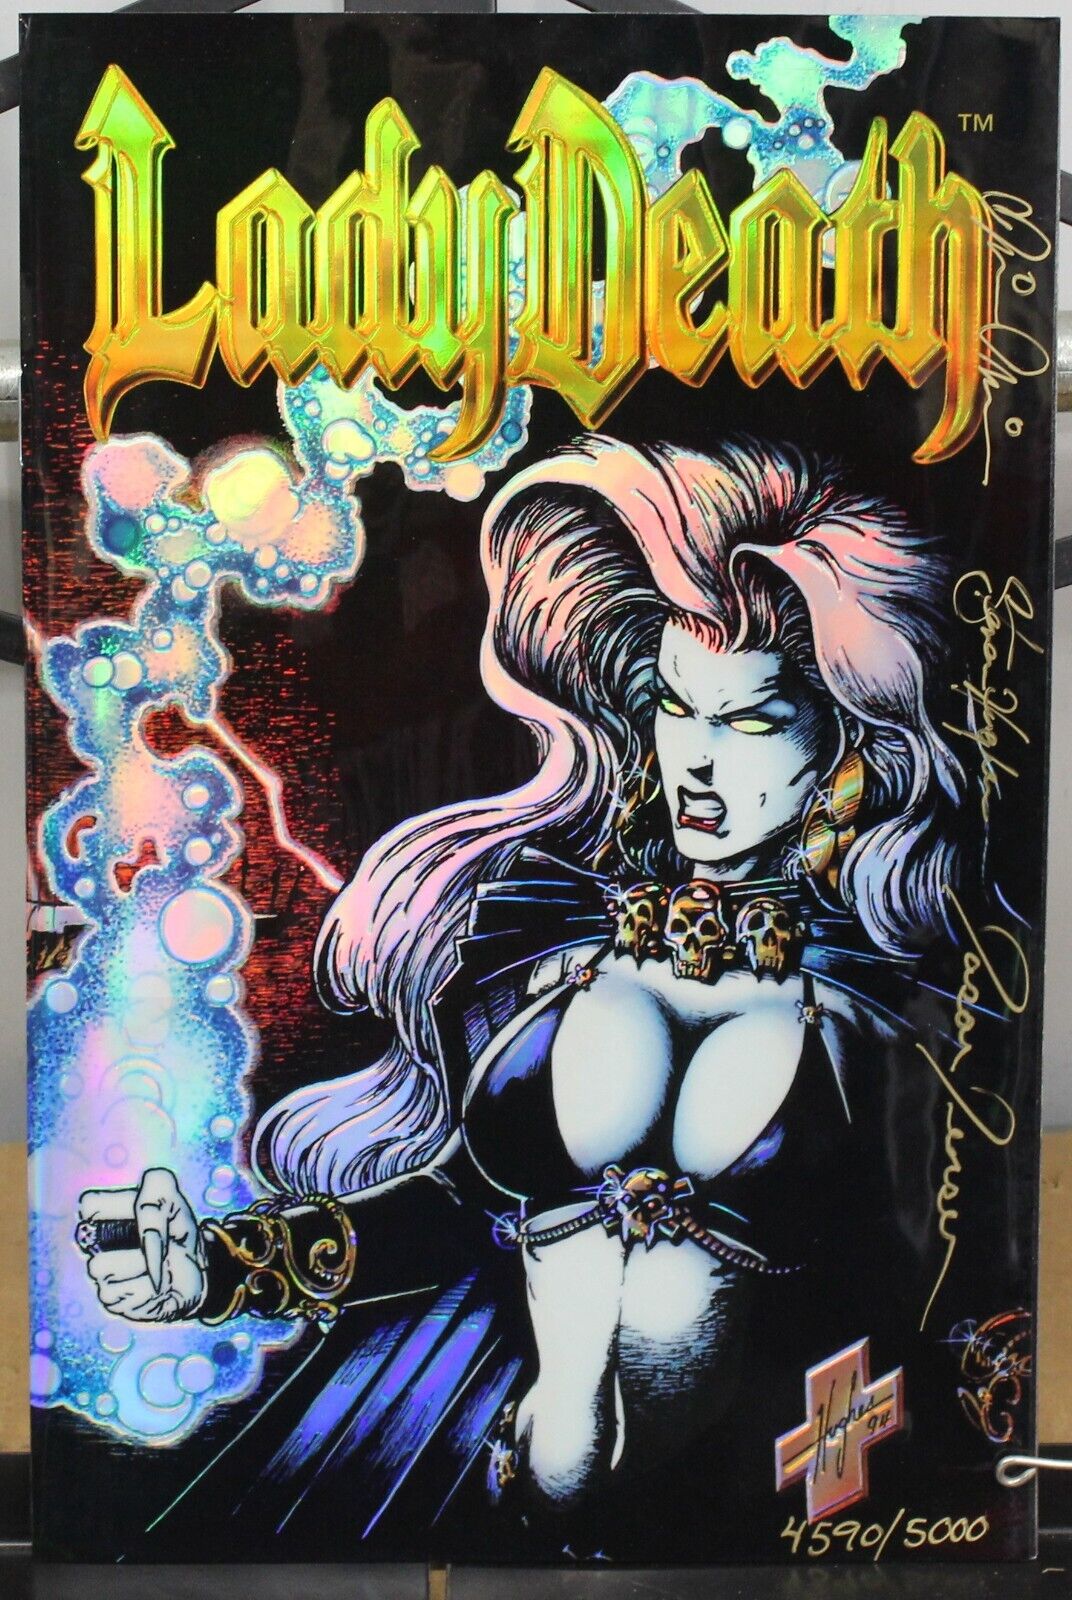 Lady Death ll: Between Heaven & Hell #1 of 4 March 1995 Chaos! Comics 4590/5000